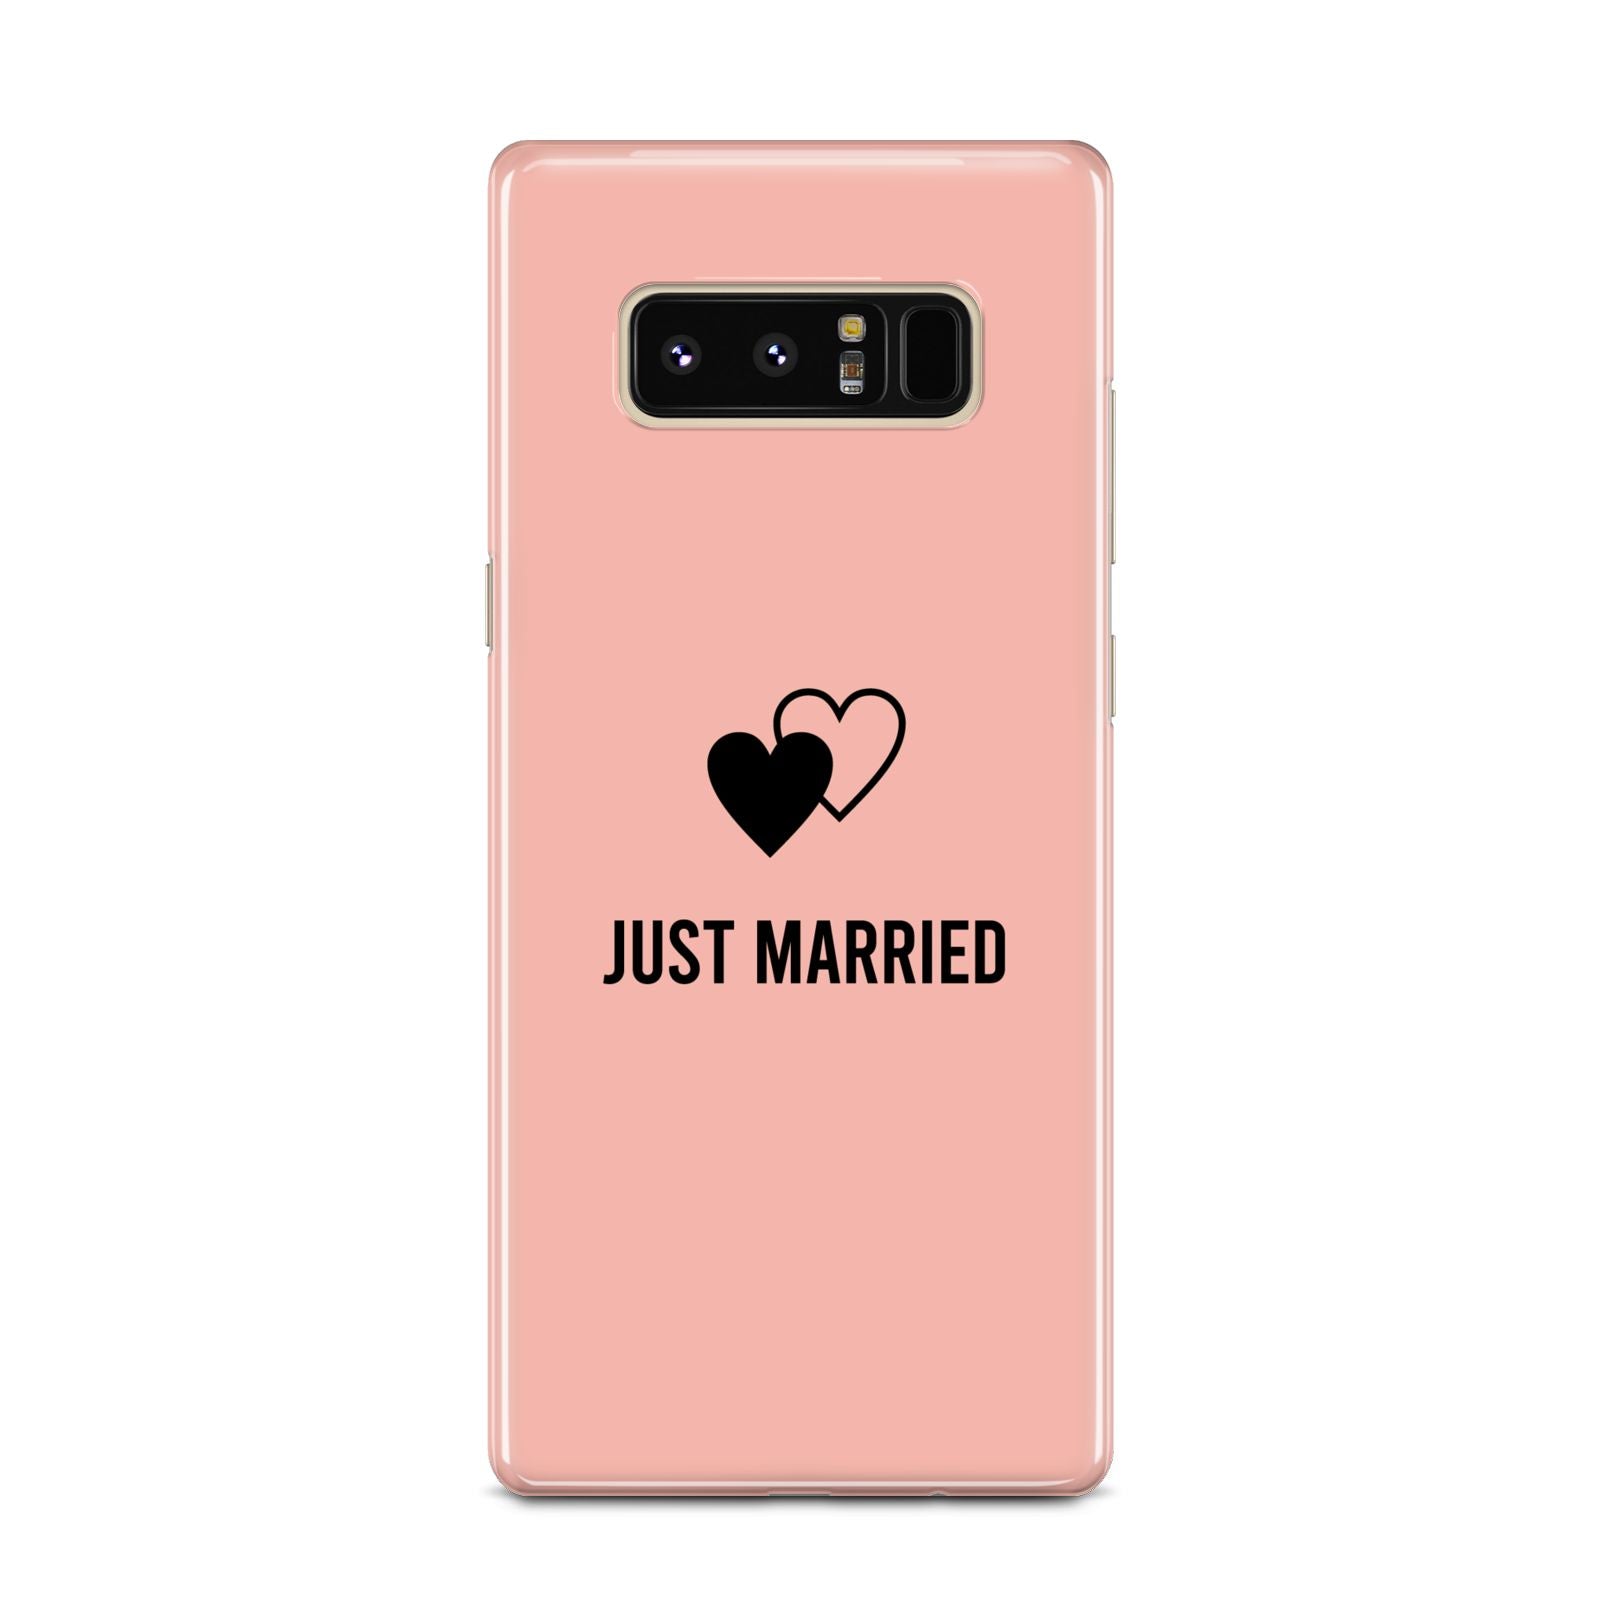 Just Married Samsung Galaxy Note 8 Case